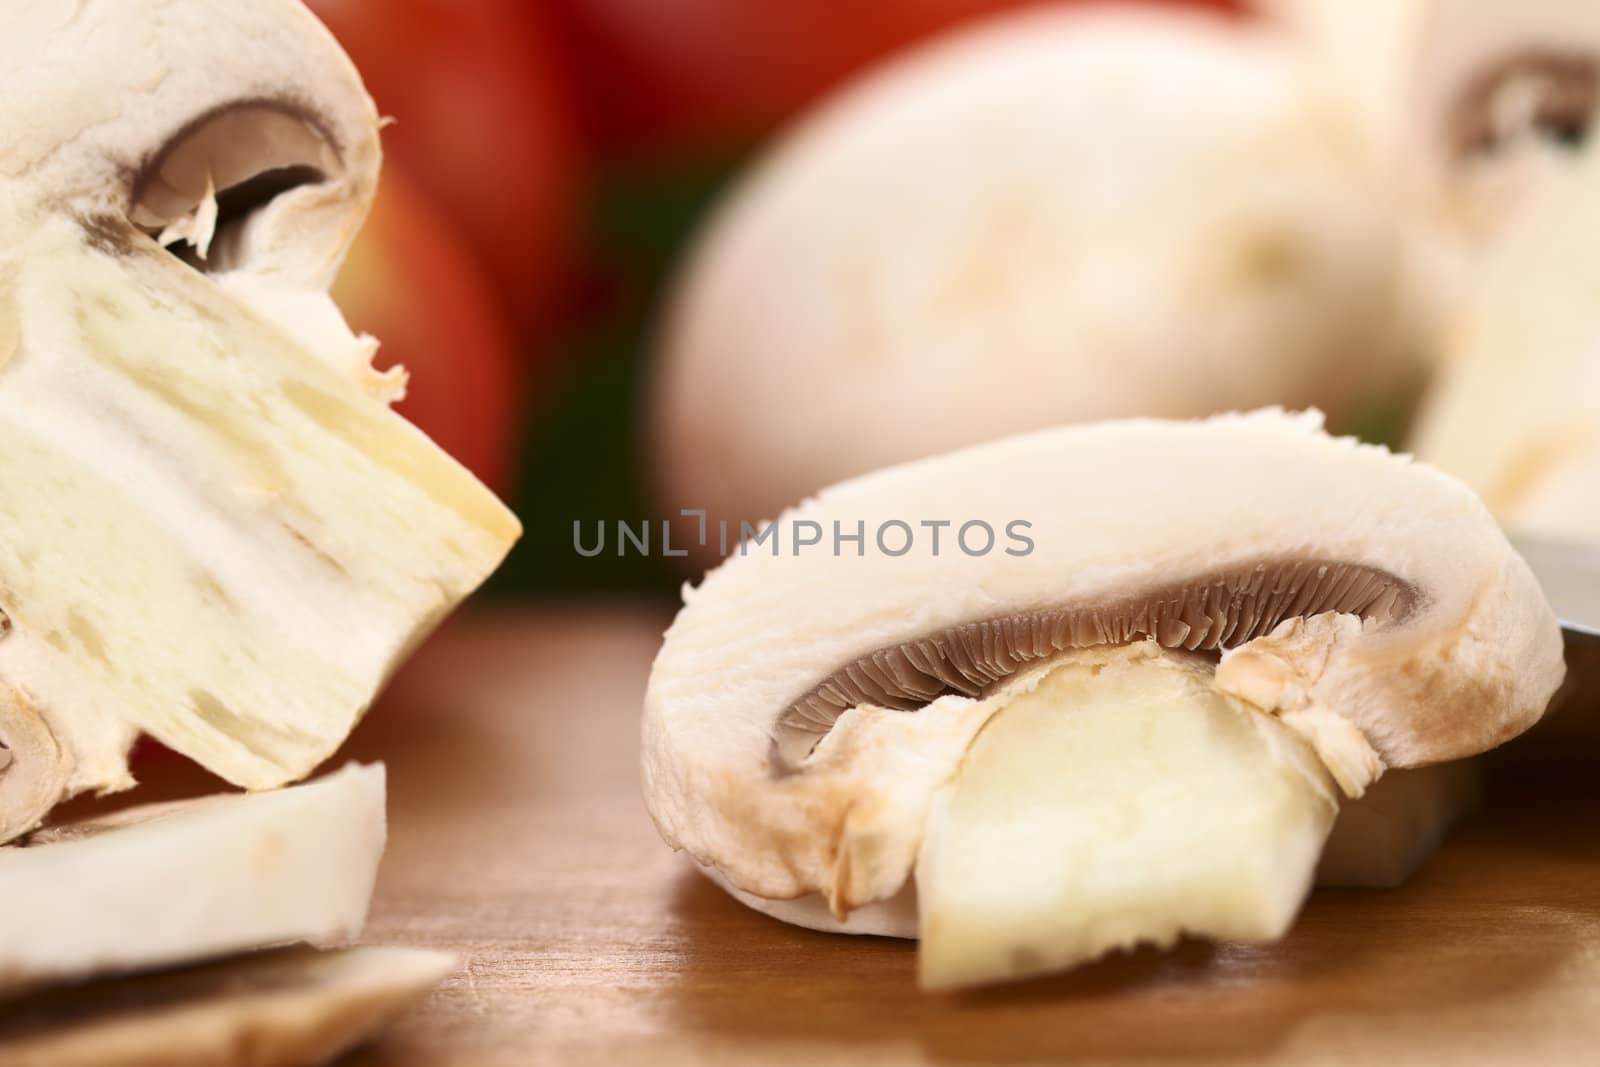 White mushroom slice with tomato and mushrooms in the back (Very Shallow Depth of Field, Focus on the gills of the mushroom slice)